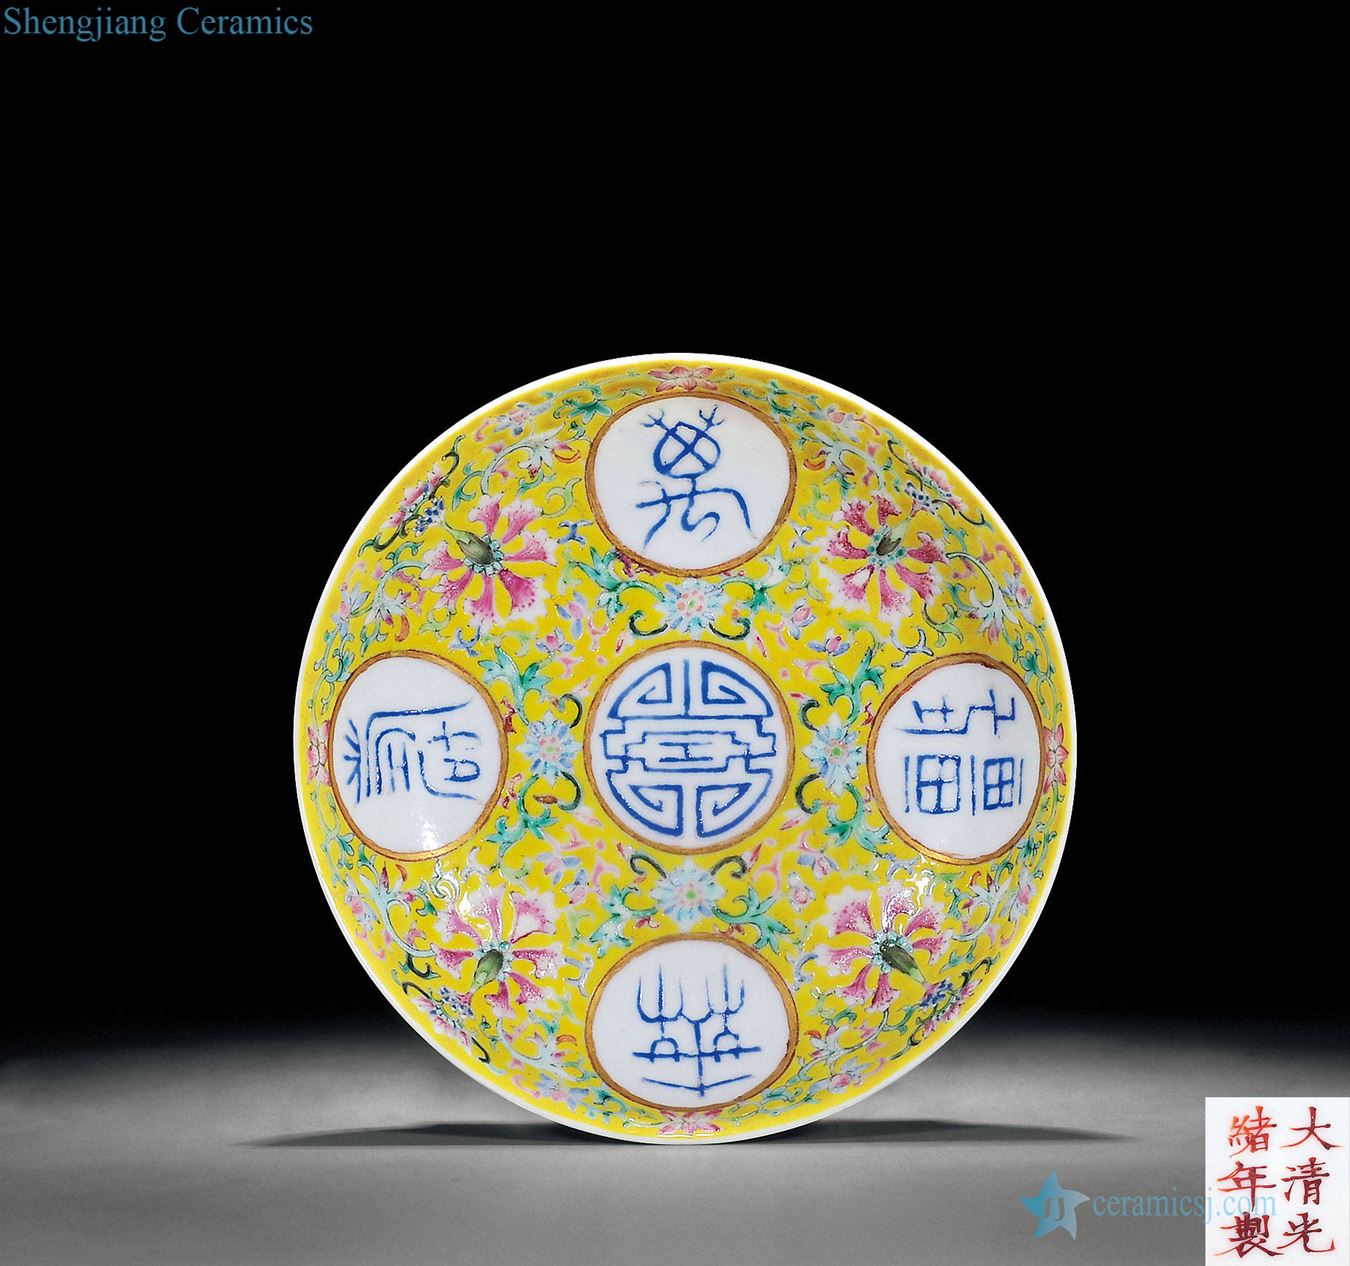 Qing guangxu To pastel yellow tie up lotus flower medallion stays in plate